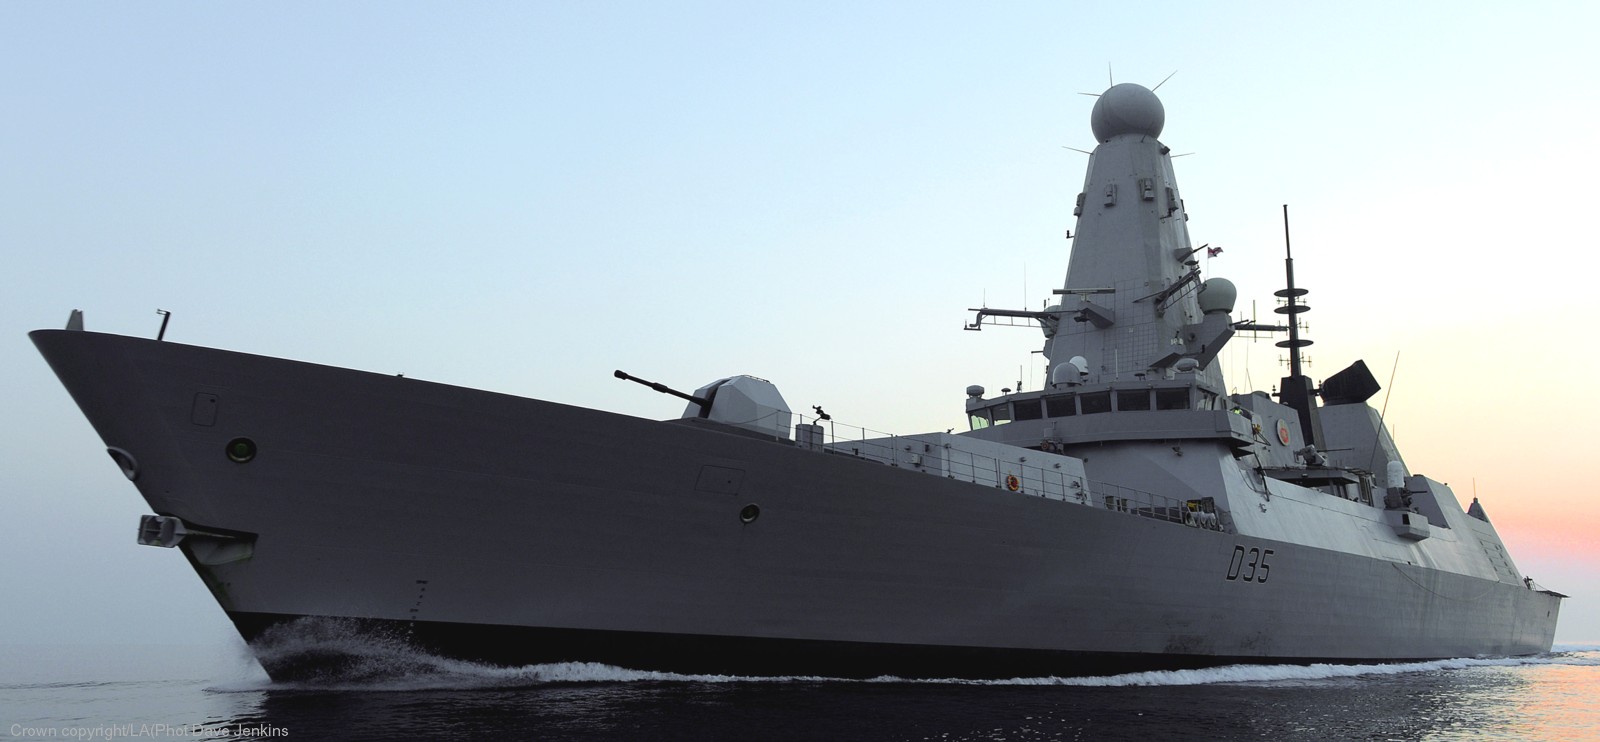 hms dragon d-35 type 45 daring class guided missile destroyer ddg royal navy sea viper paams 22